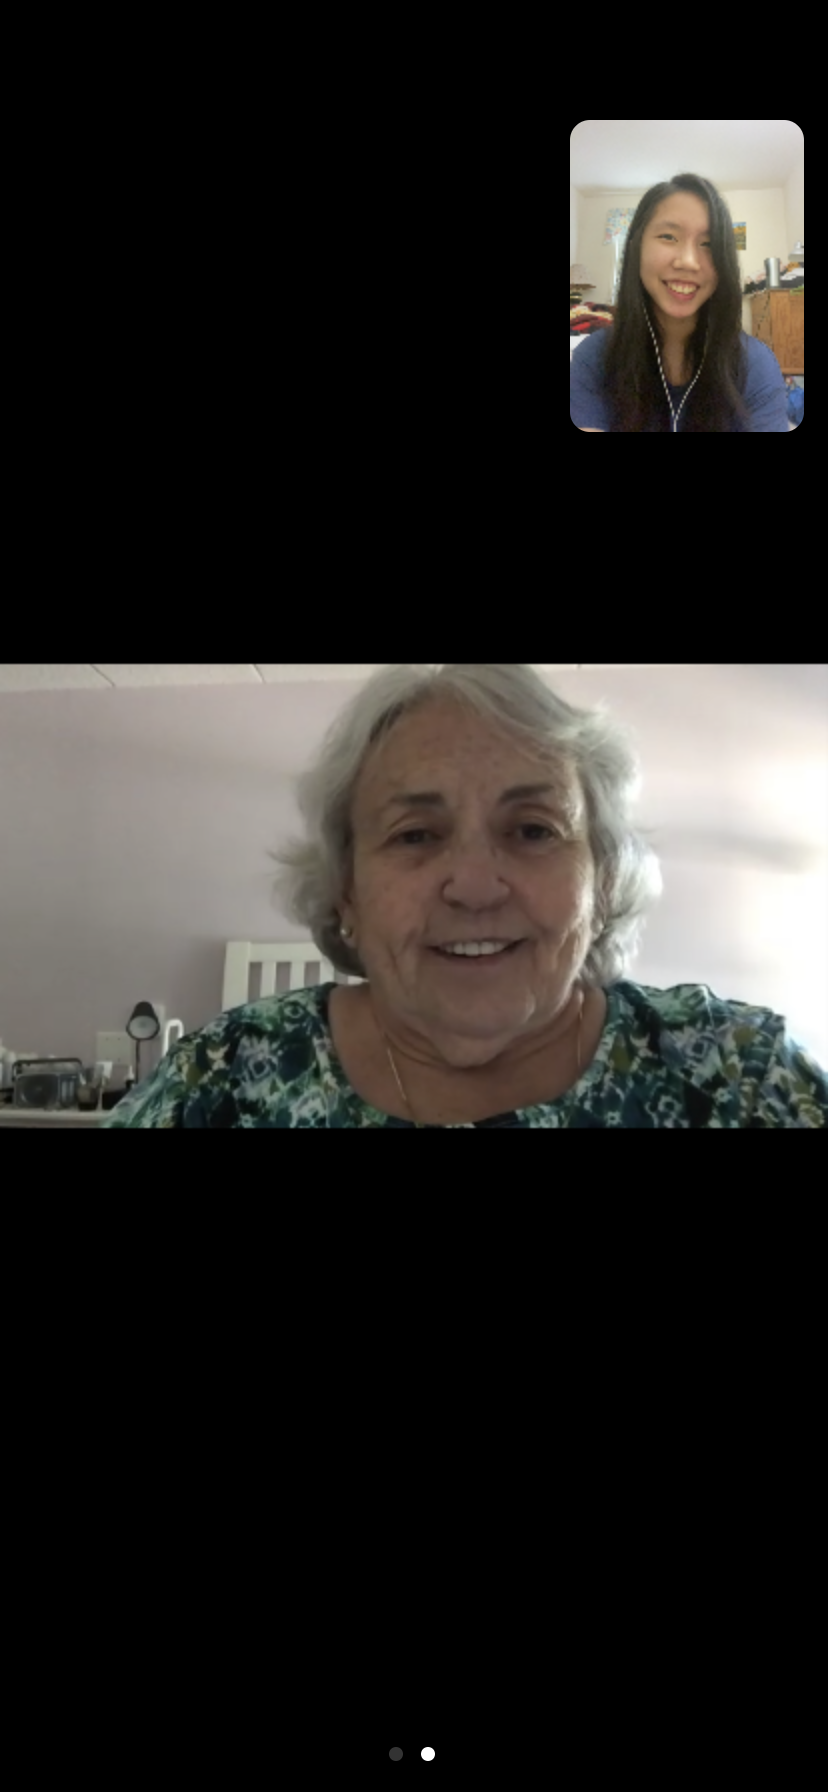 Screenshot of a video call with two people smiling